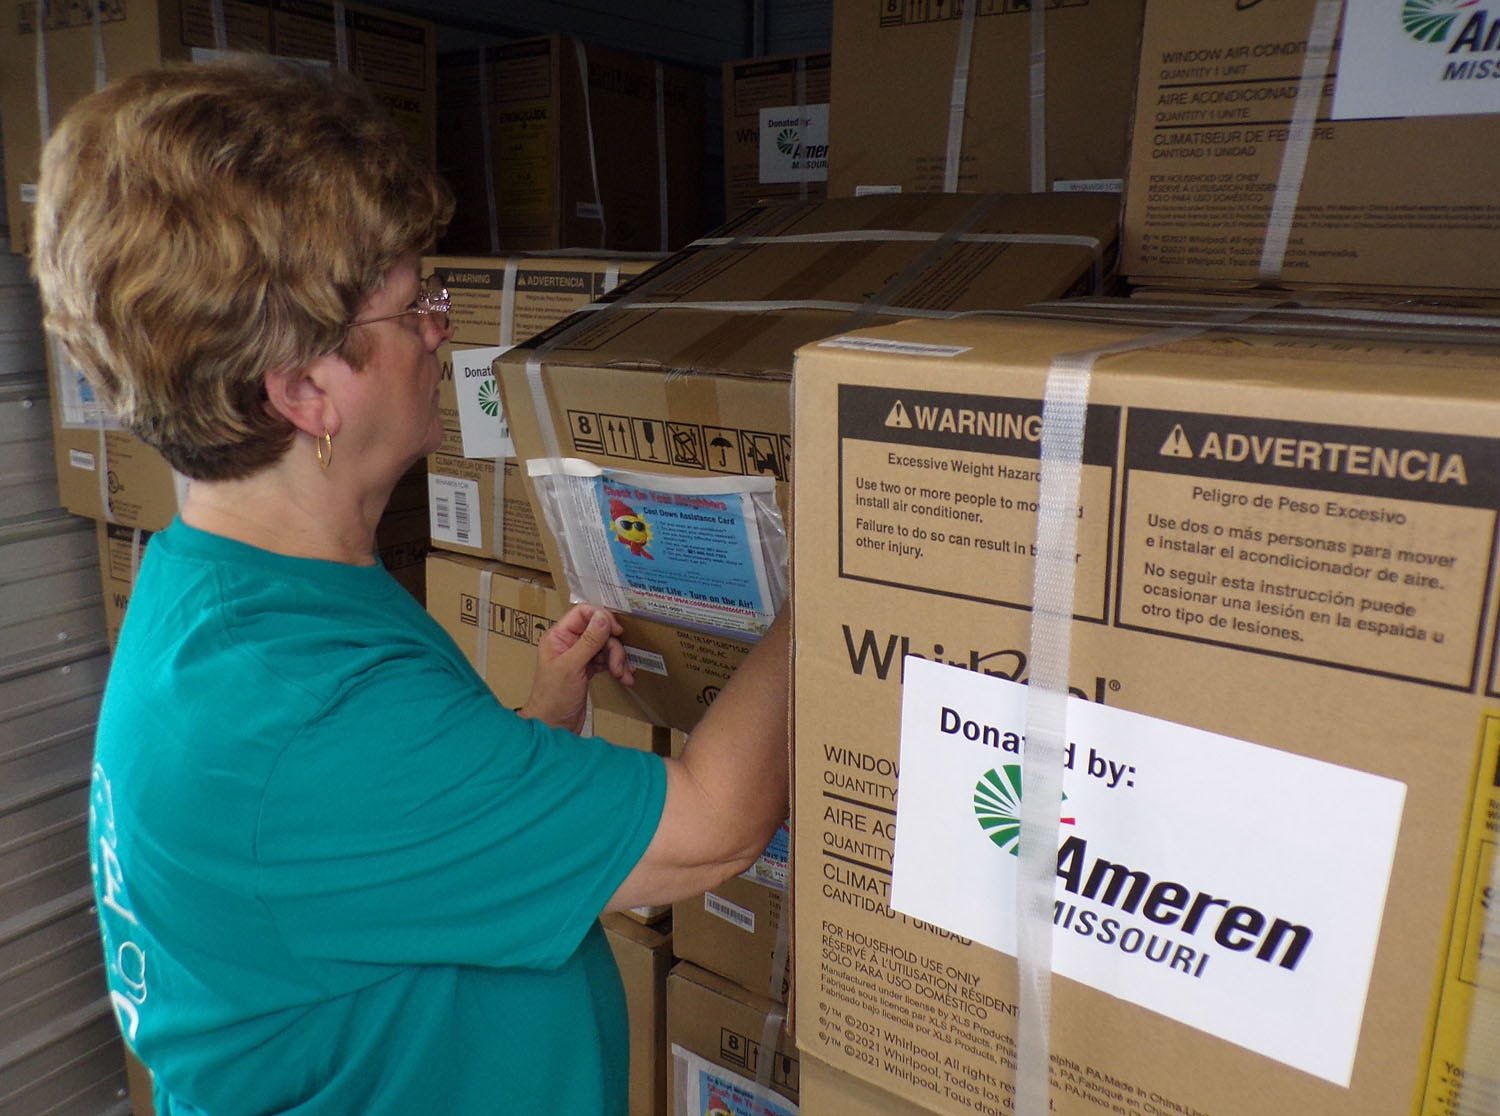 North East Community Action Corporation (NECAC) County Services Programs Director Linda Fritz looks over 80 air conditioners donated to the not-for-profit agency through Cool Down St. Louis and AmerenMissouri. The units will be distributed to NECAC clients who are elderly, disabled or have young children with health problems in counties served by Ameren. For more information, or to apply, call NECAC Randolph County Service Coordinator Patsy Redding at 660-263-6595. The NECAC Randolph County Service Center is at 1903 North Morley Suite B in Moberly.